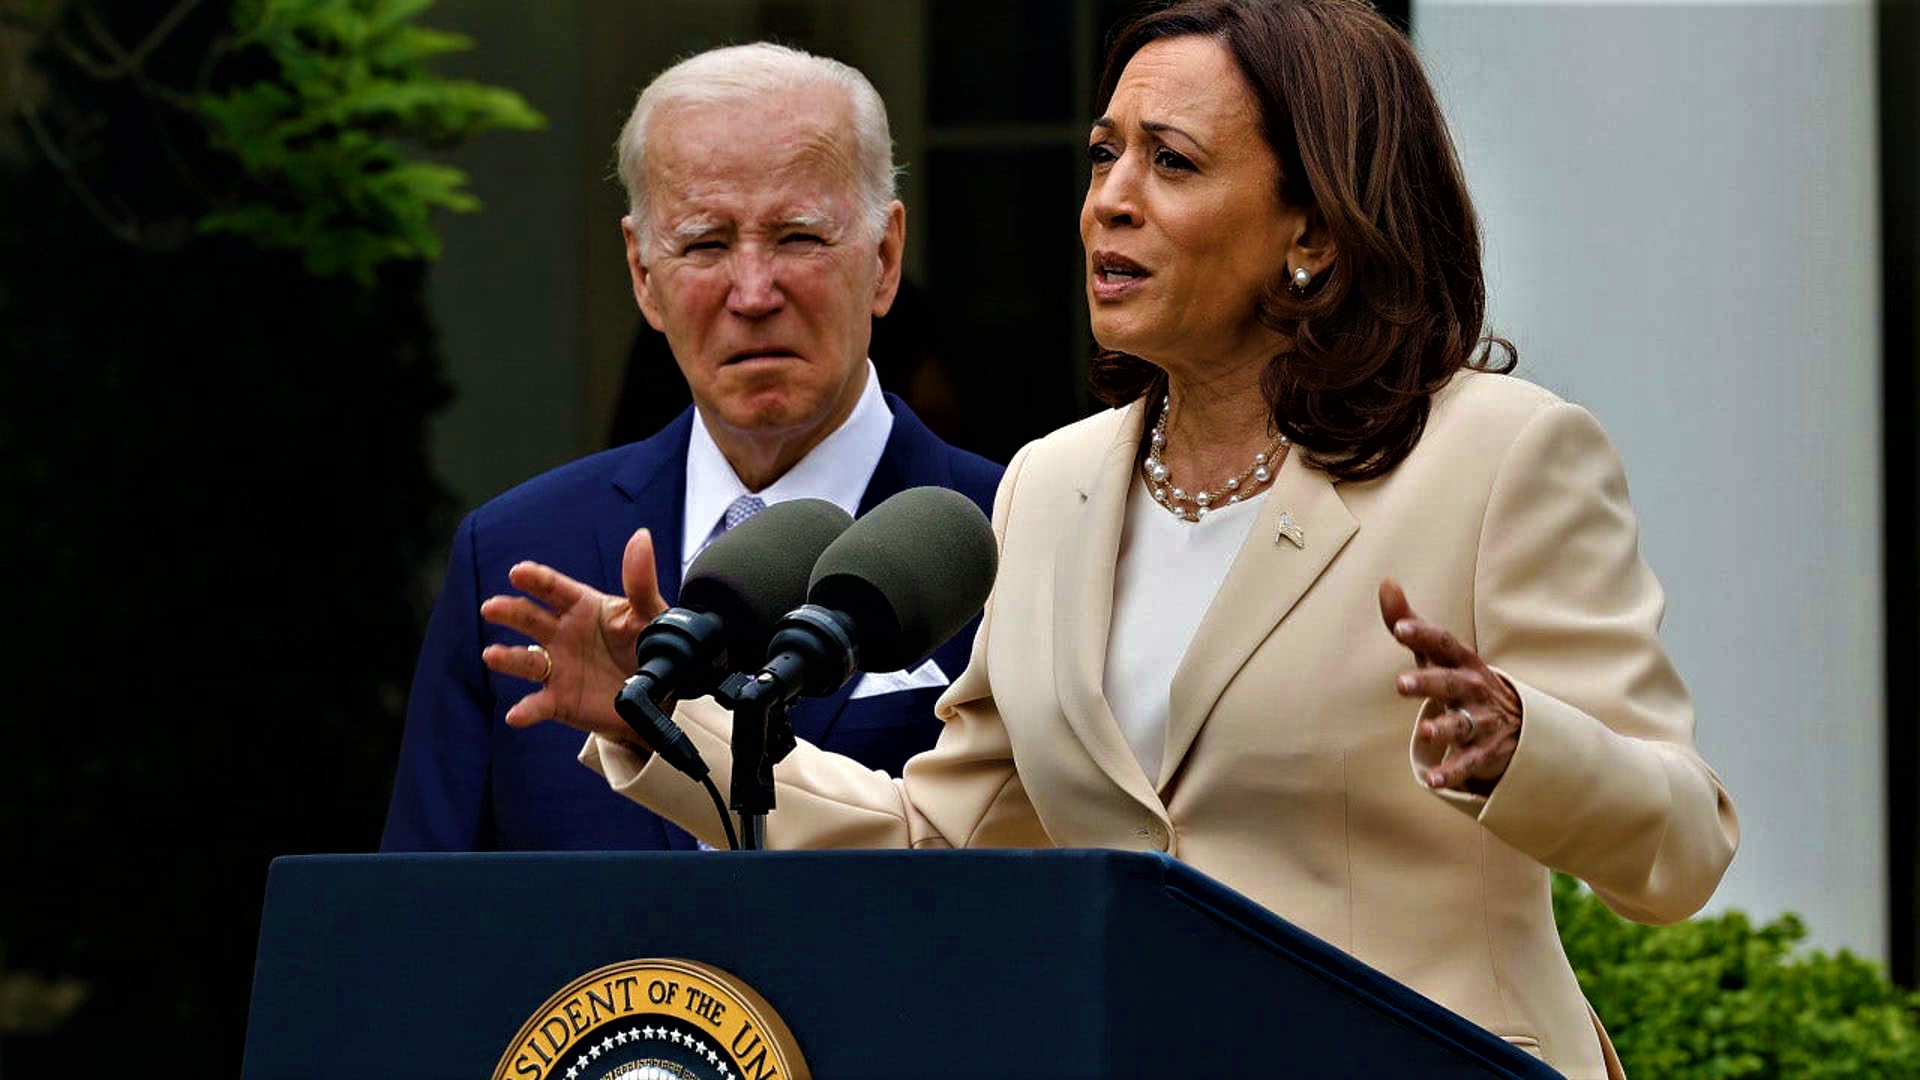 High Quality kamala rambling while biden's lost in thought Blank Meme Template